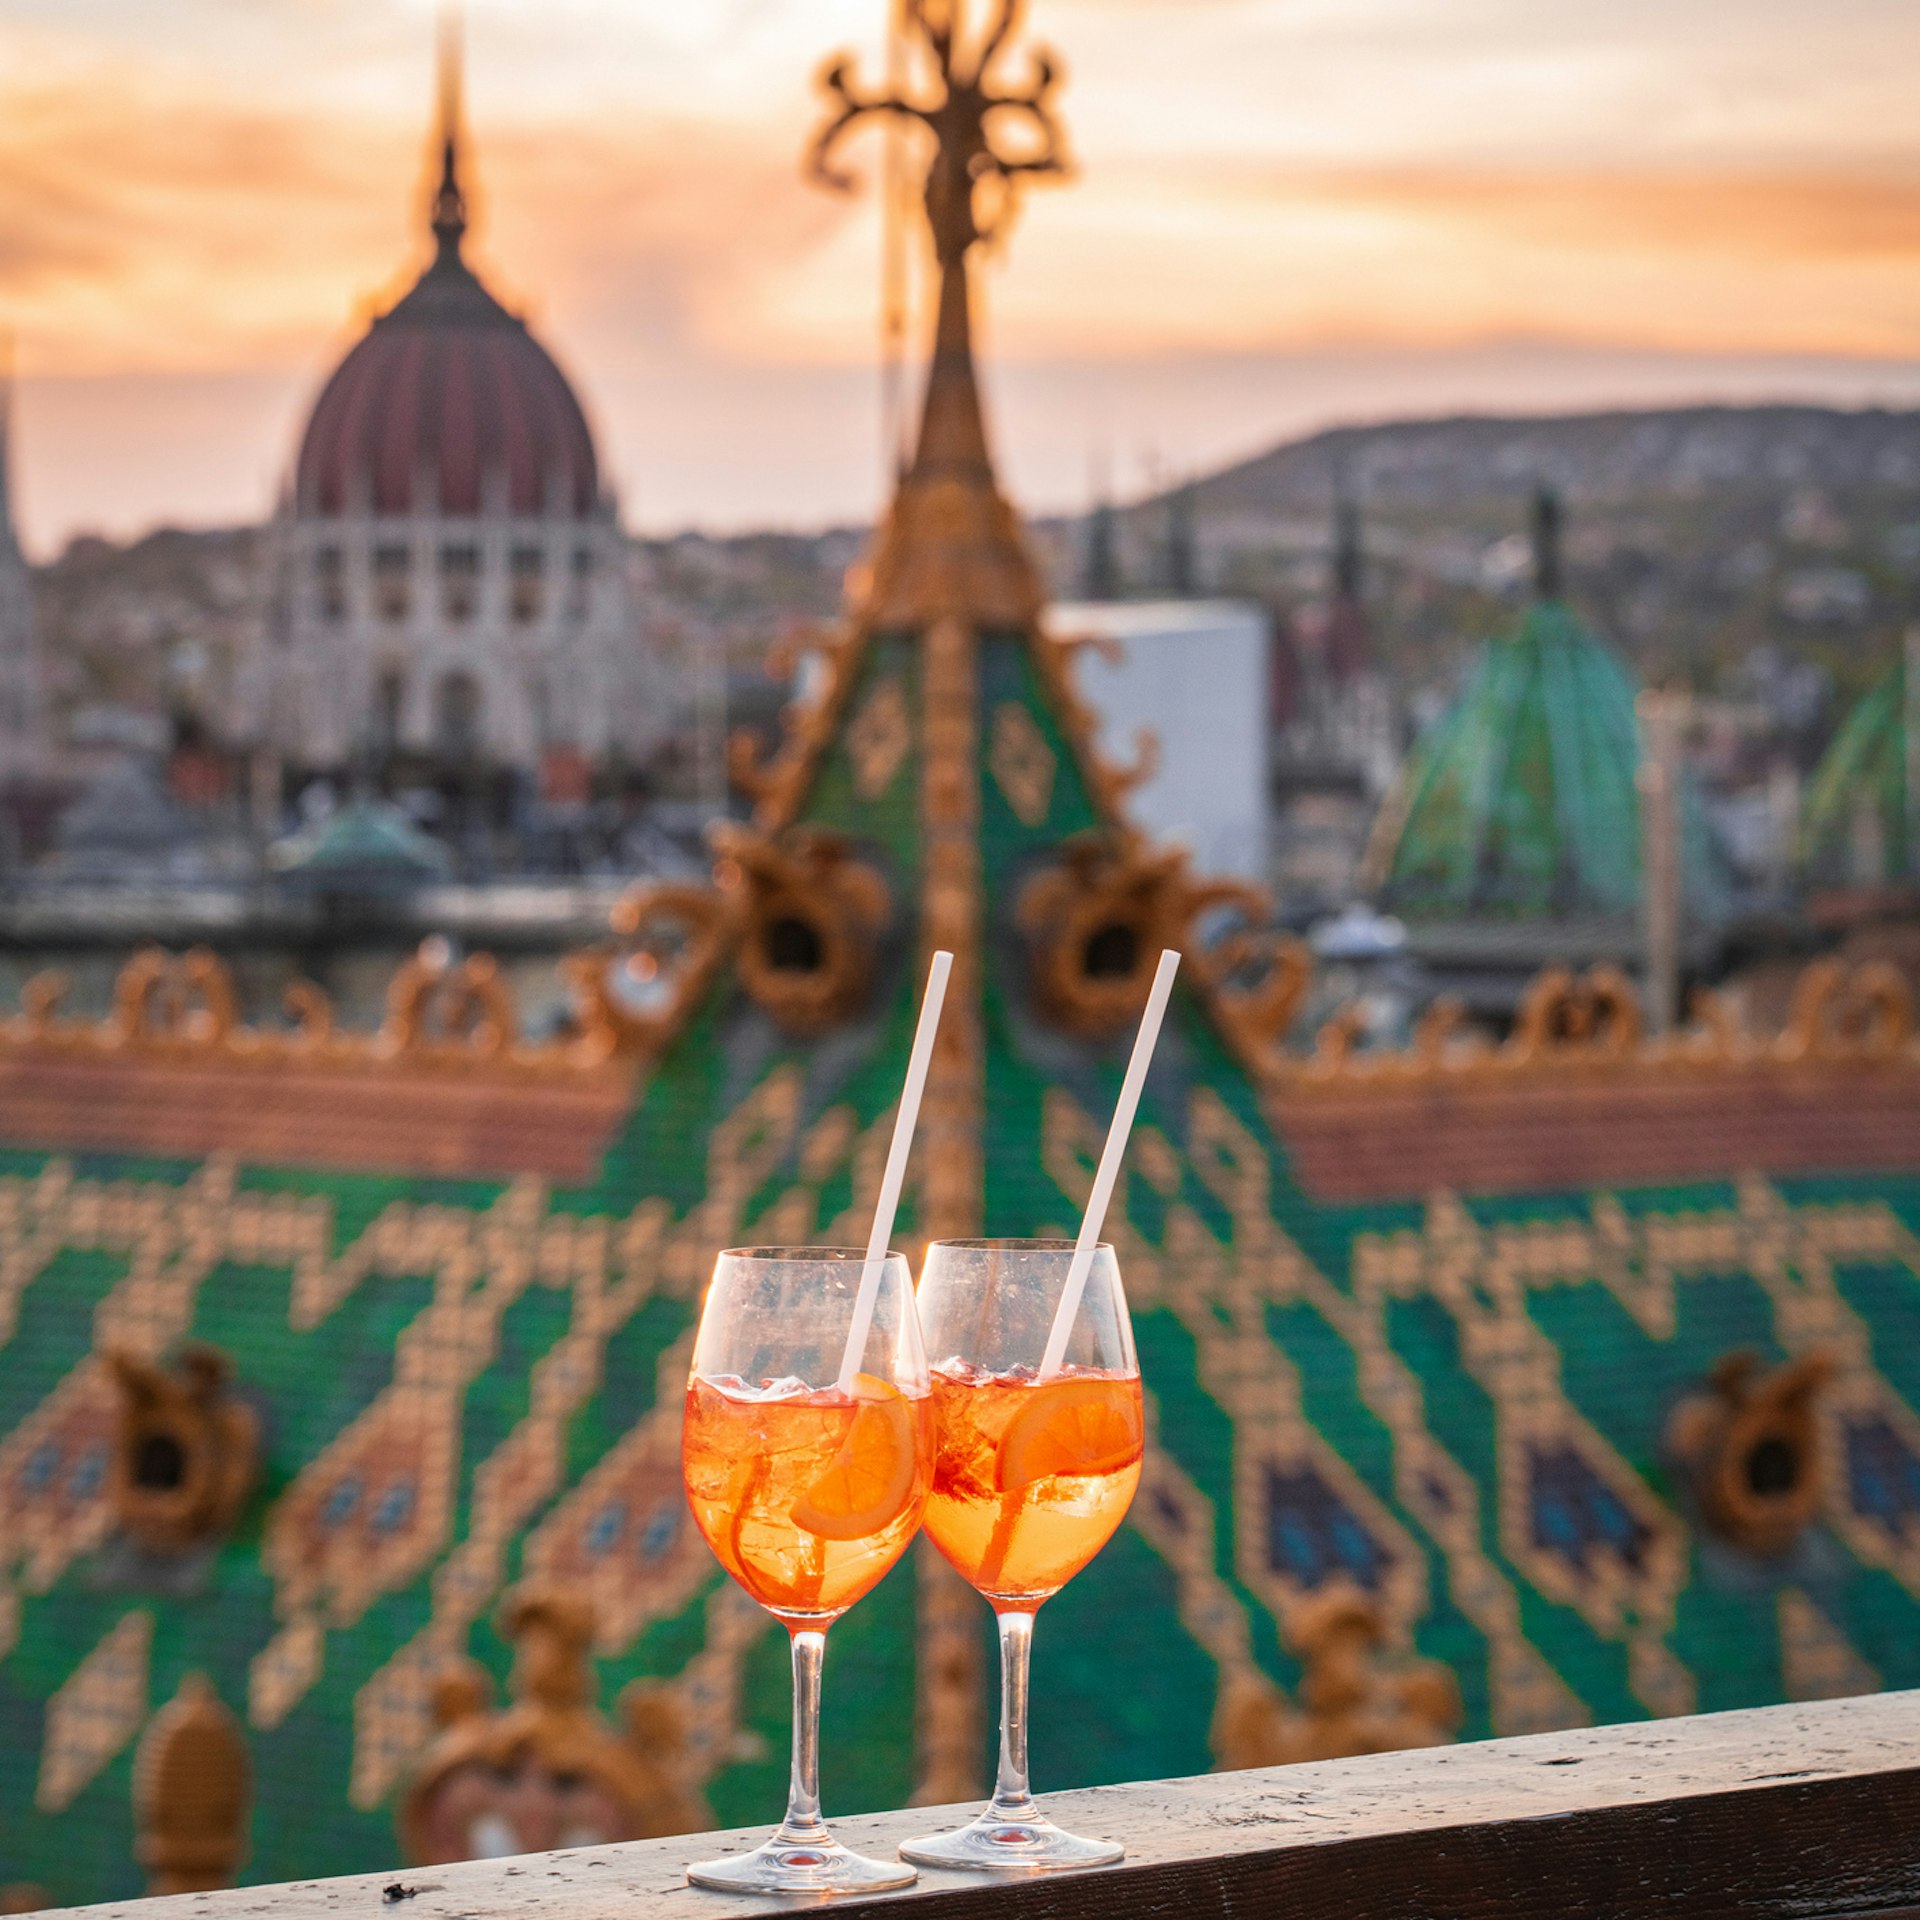 A pair of cocktails at sunset on a rooftop ledge in focus, with buildings including the Parliament in the background, Budapest, Hungary, Europe